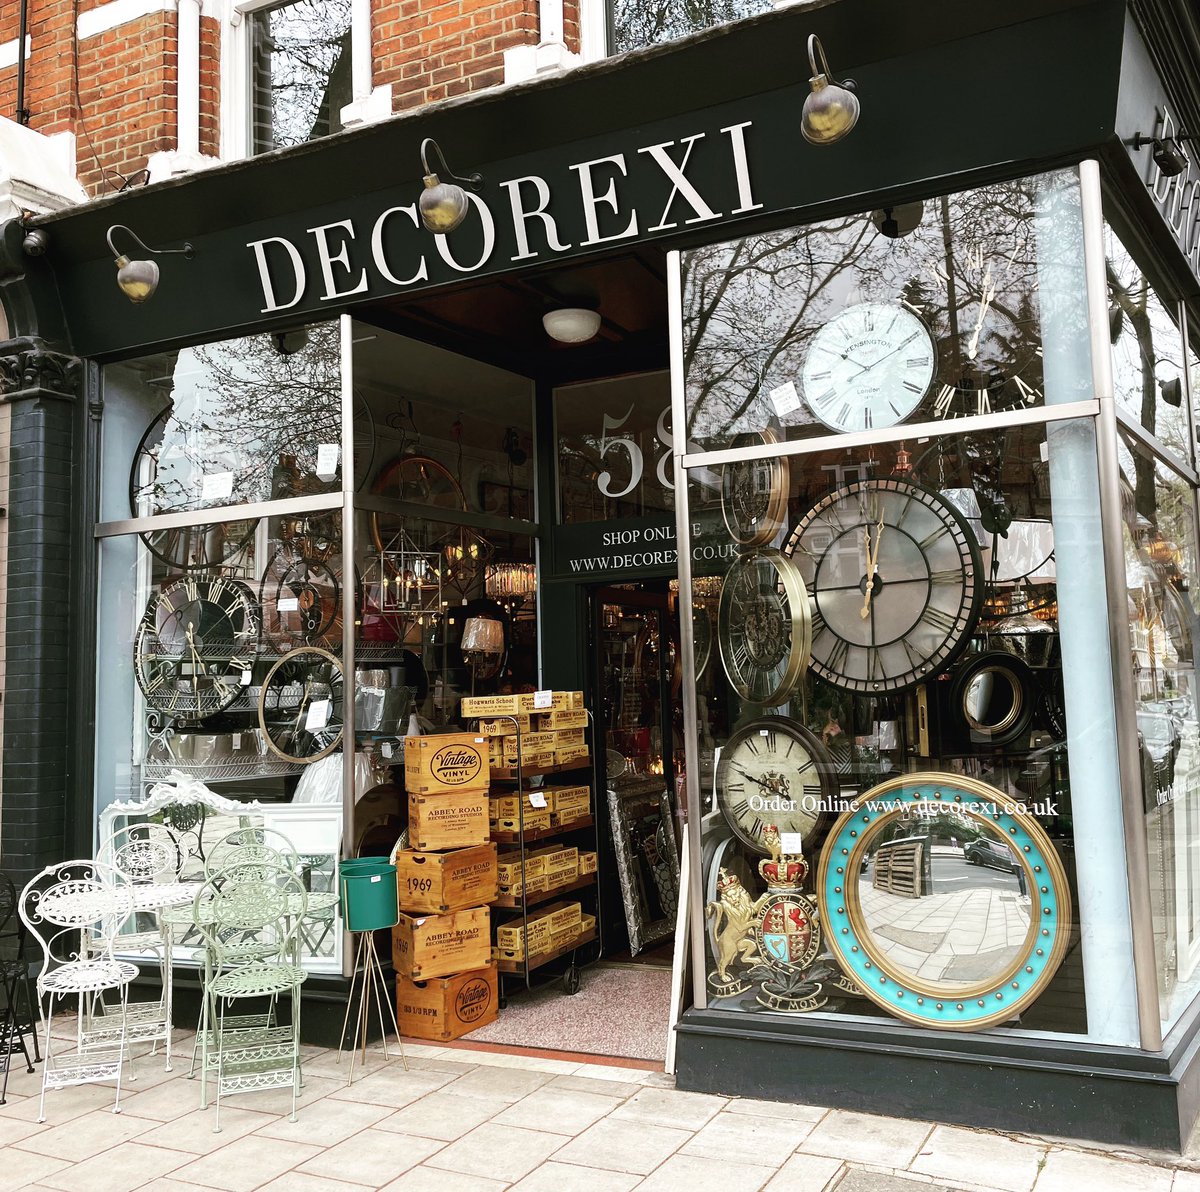 We’re open Bank Holiday Monday 11am to 5.30pm.  
.
#london #chiswick #localshop #homeware